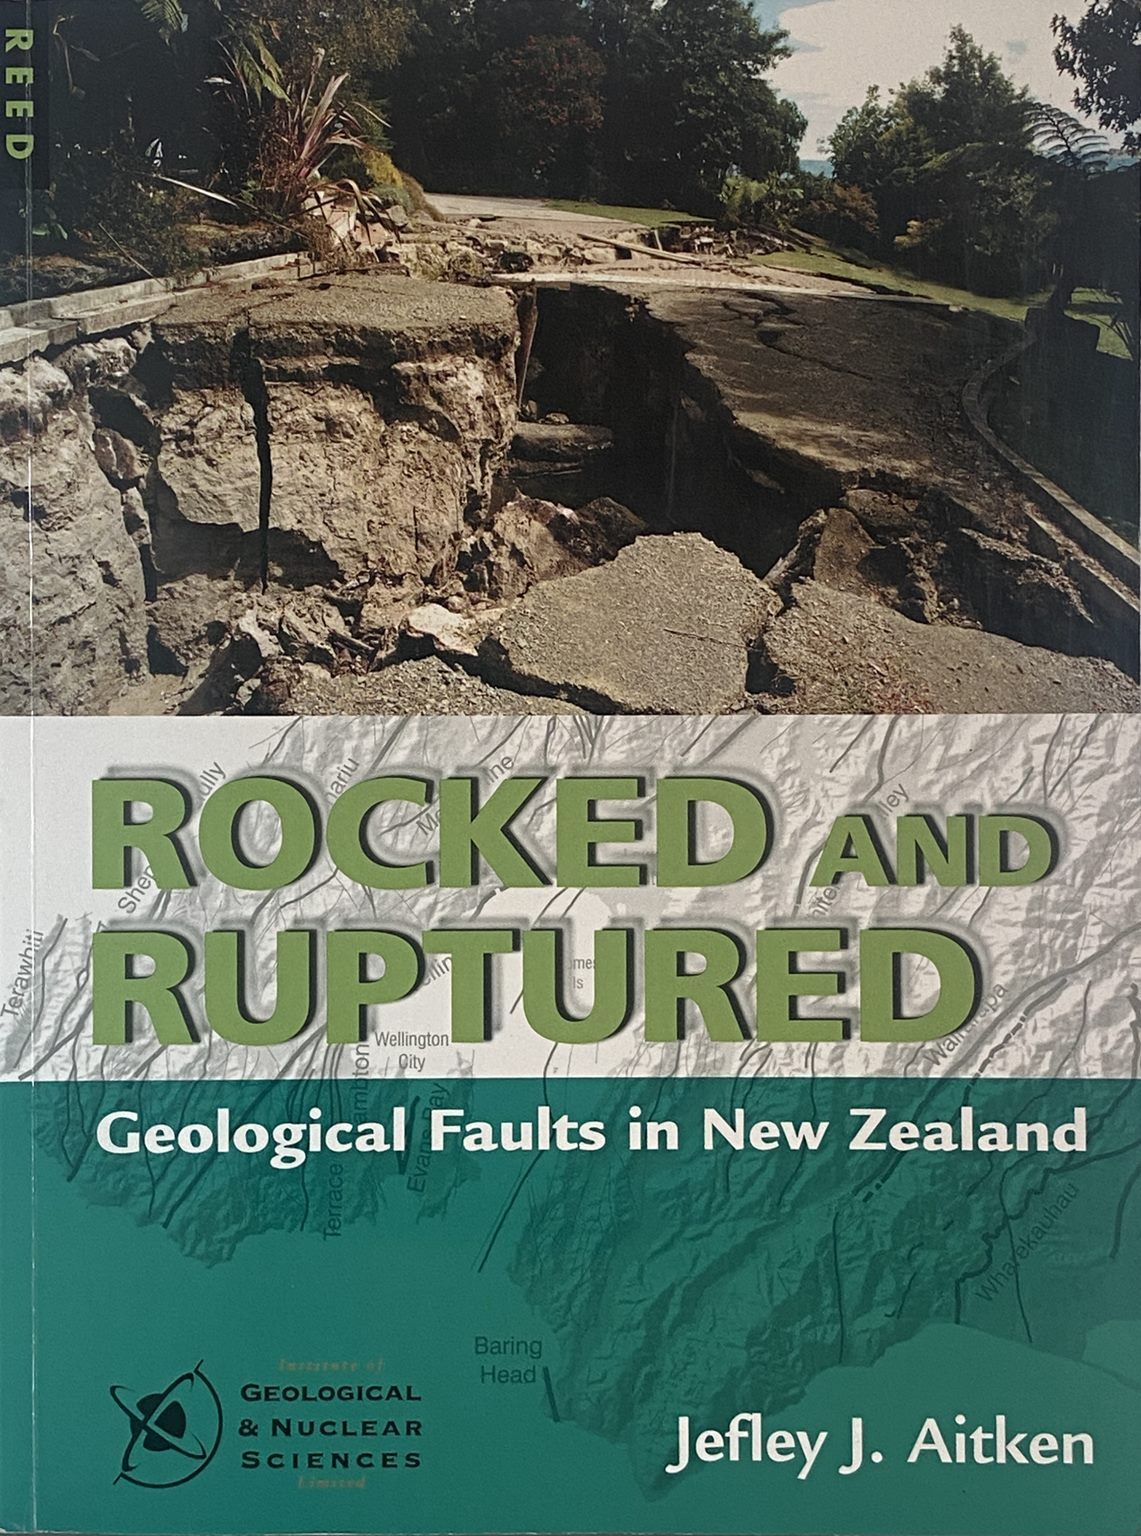 ROCKED AND RUPTURED: Geological Faults in New Zealand